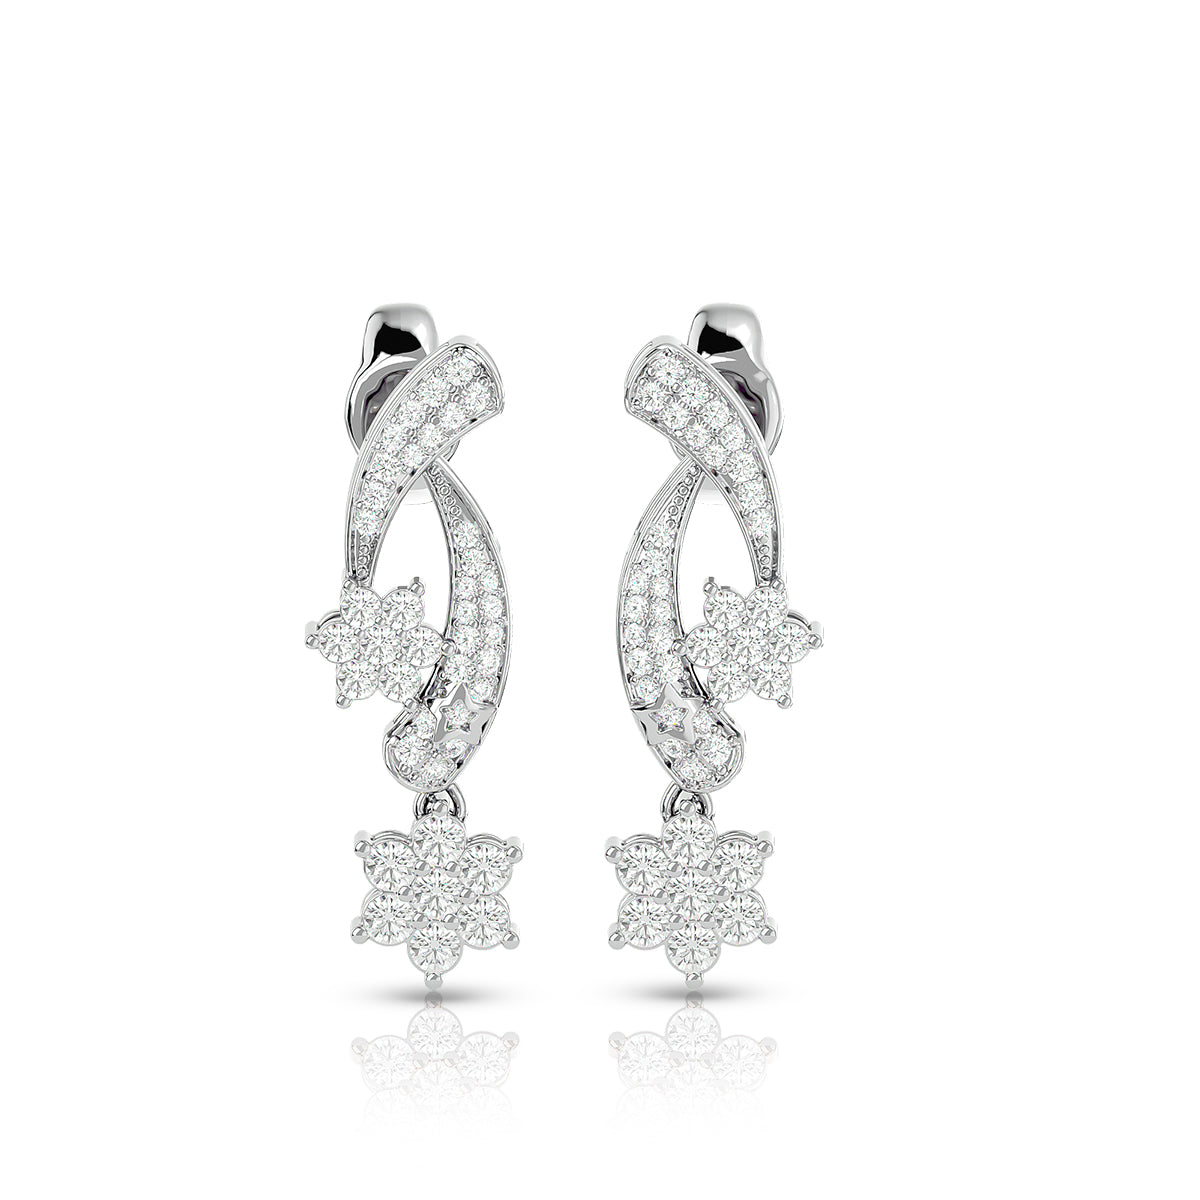 Persona Earrings 18K White Gold With Diamonds